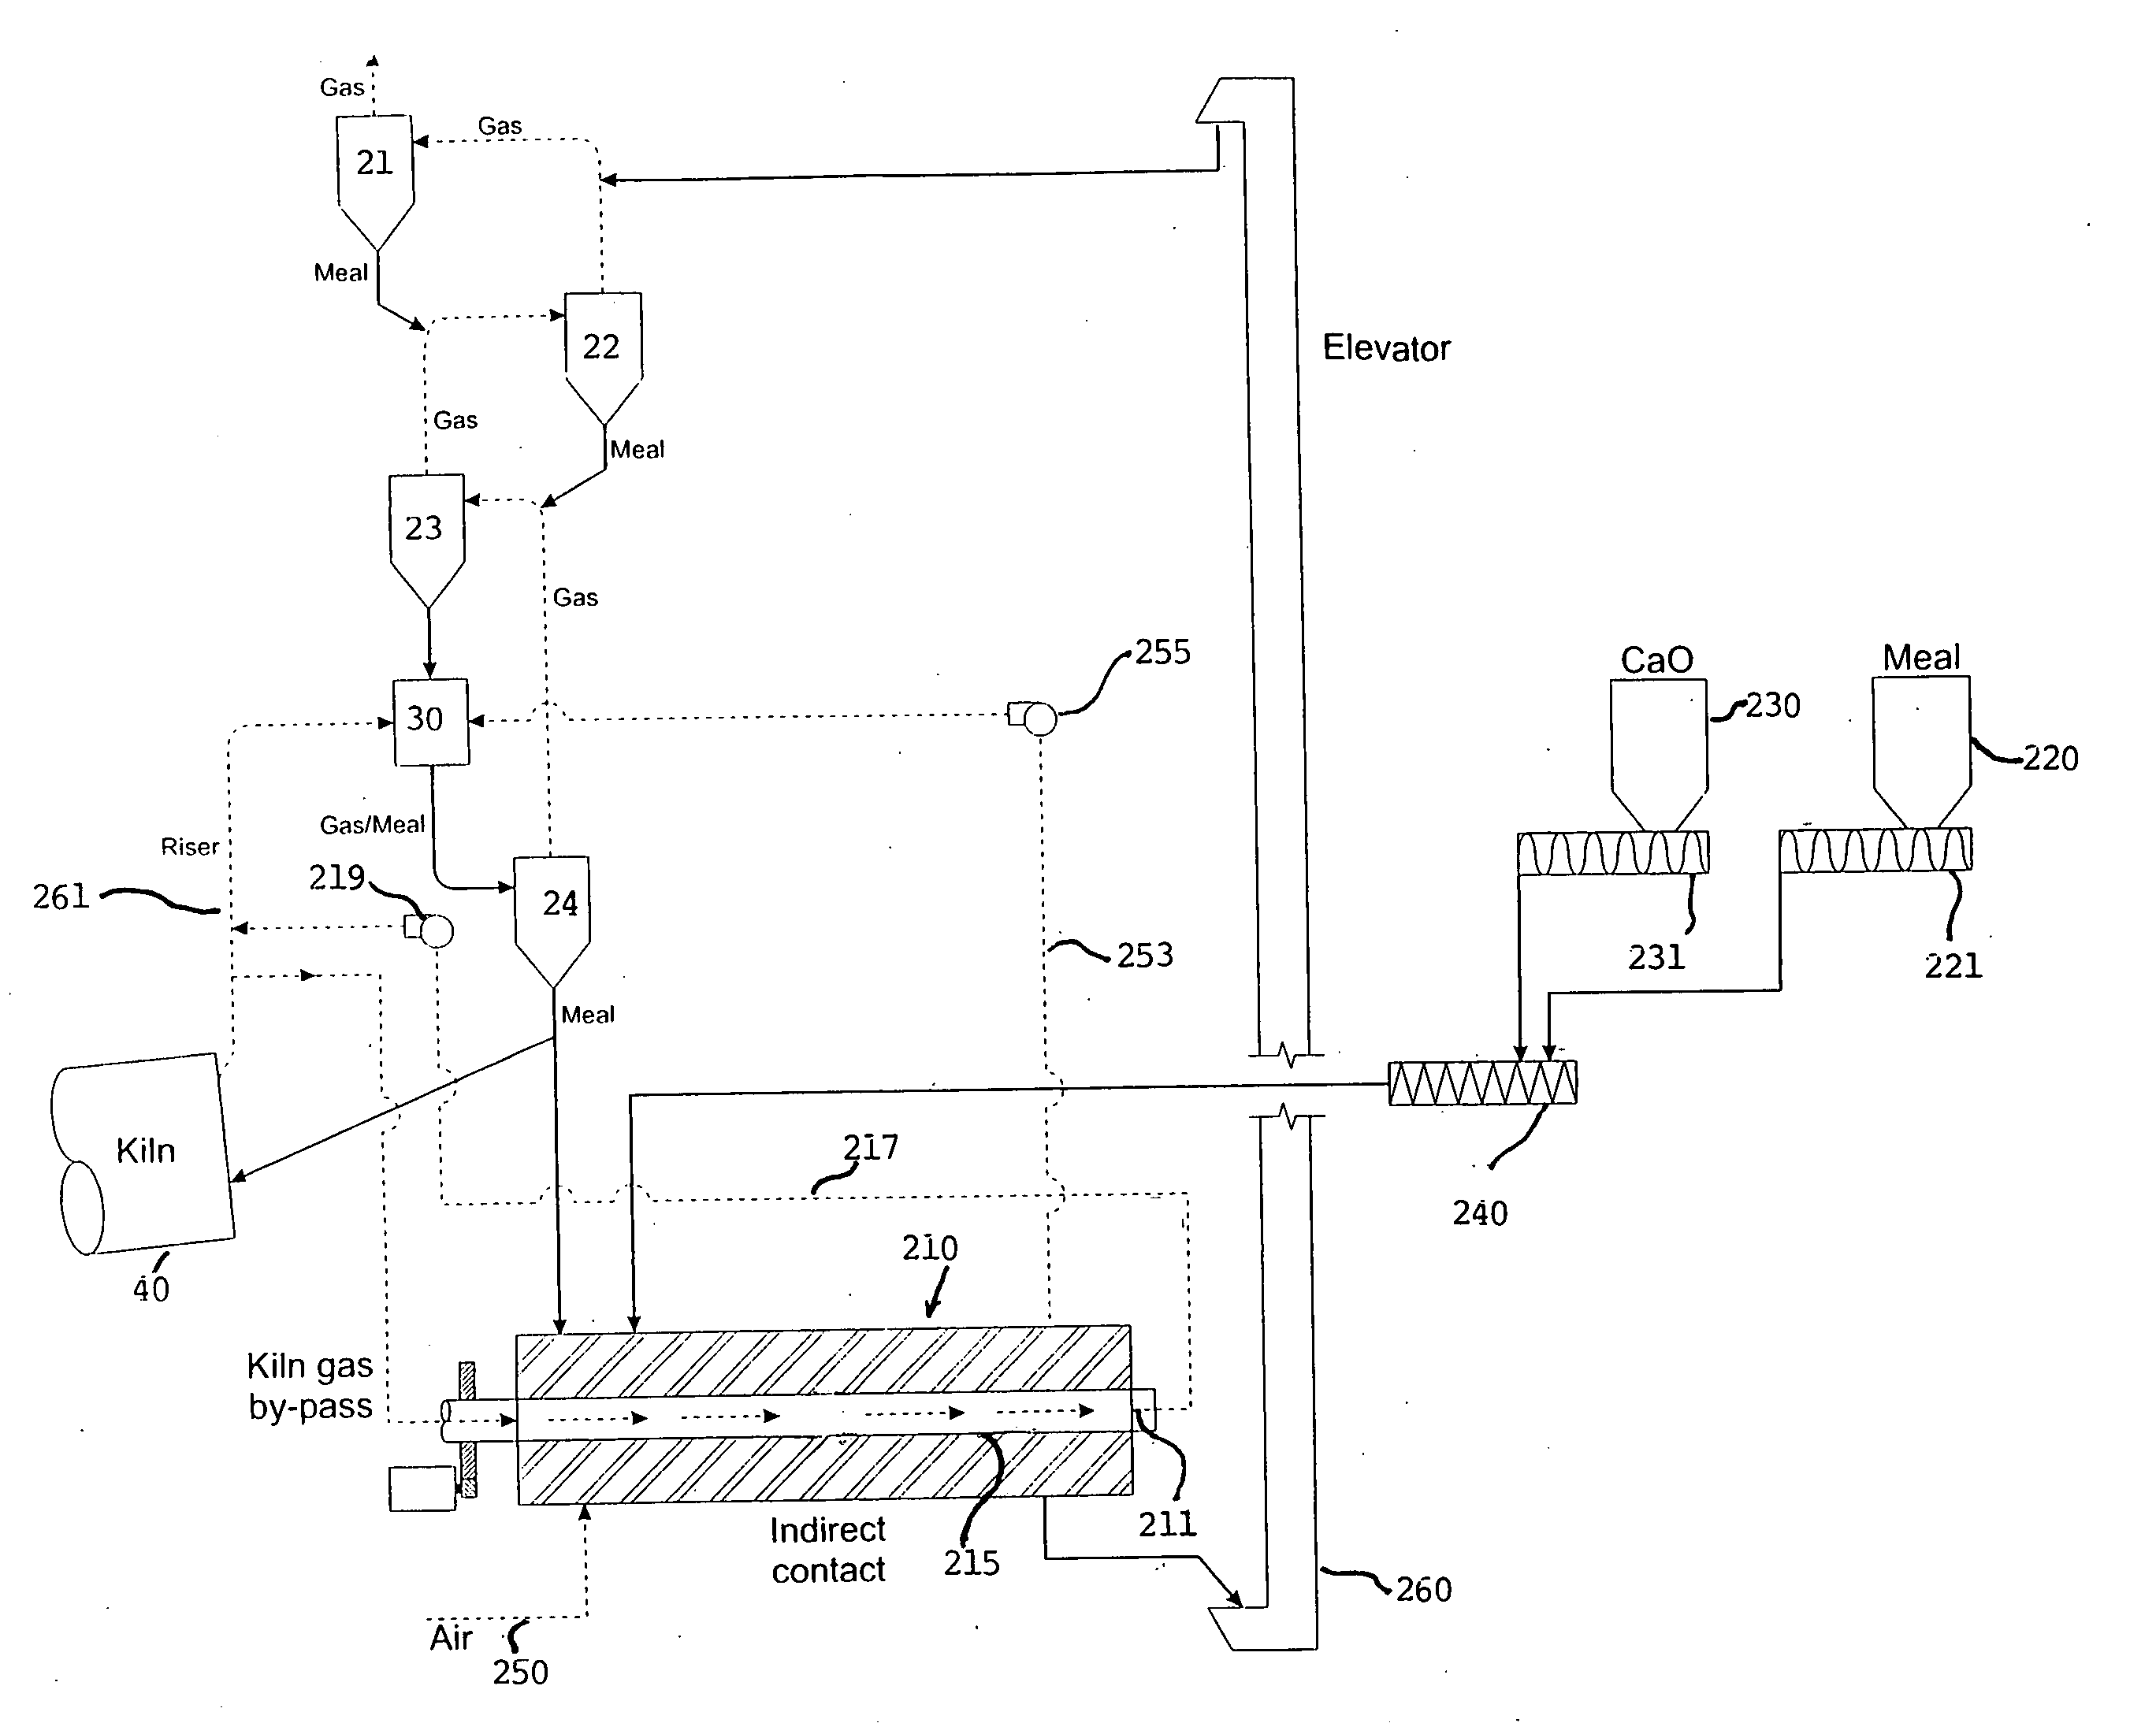 Method and apparatus for controlling pollution from a cement plant